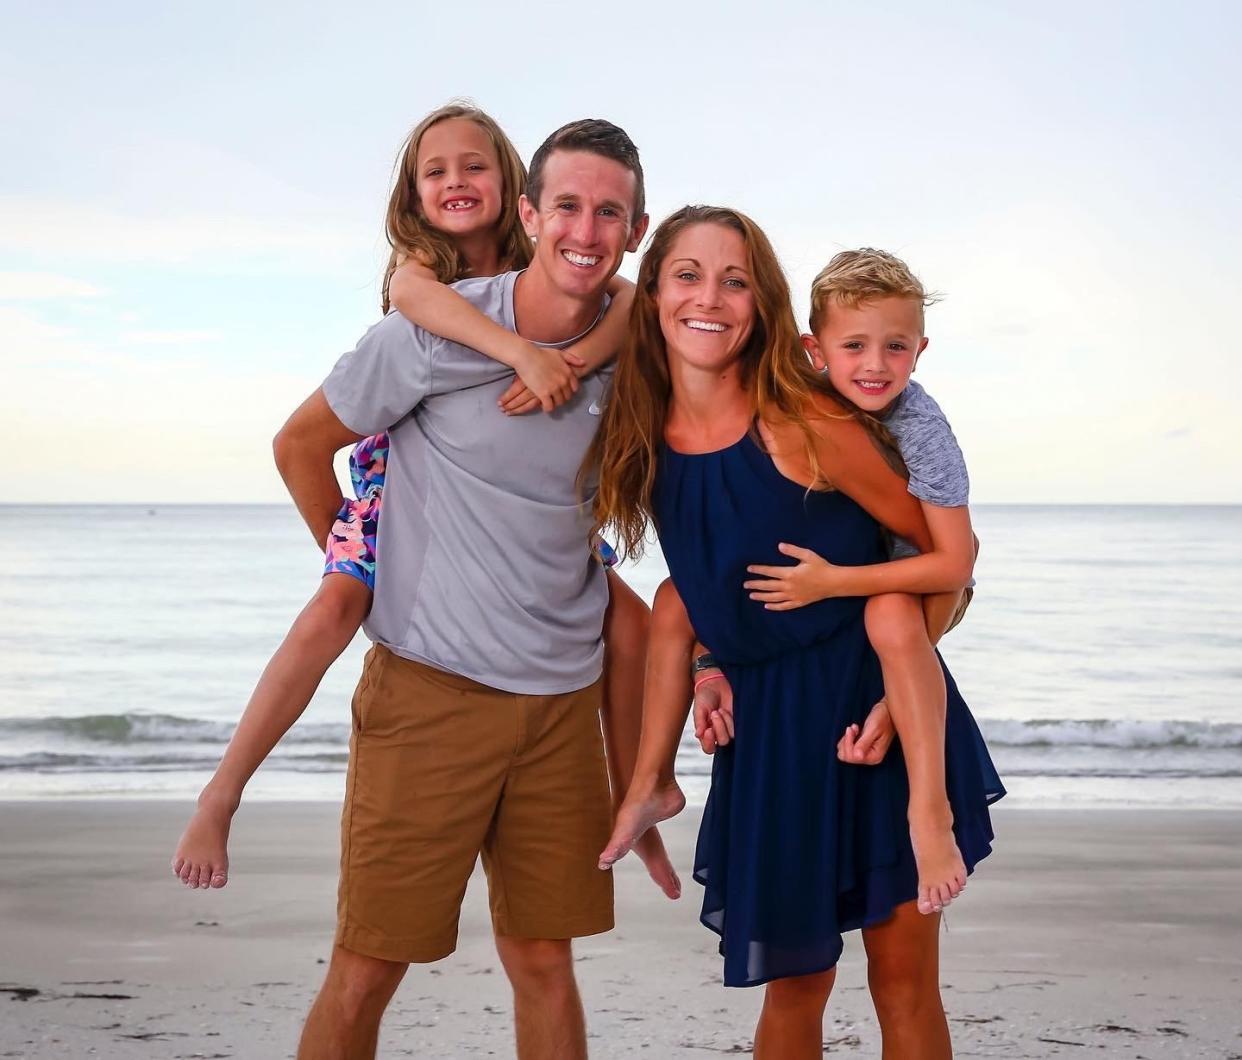 Becki Spellman, 40, of Hilliard, Ohio, is an elite runner training for the masters category of the Detroit Free Press International Half Marathon in October. She’s shown with her 9-year-old twins, Corra and Nolan, and her husband, Ryan Spellman.